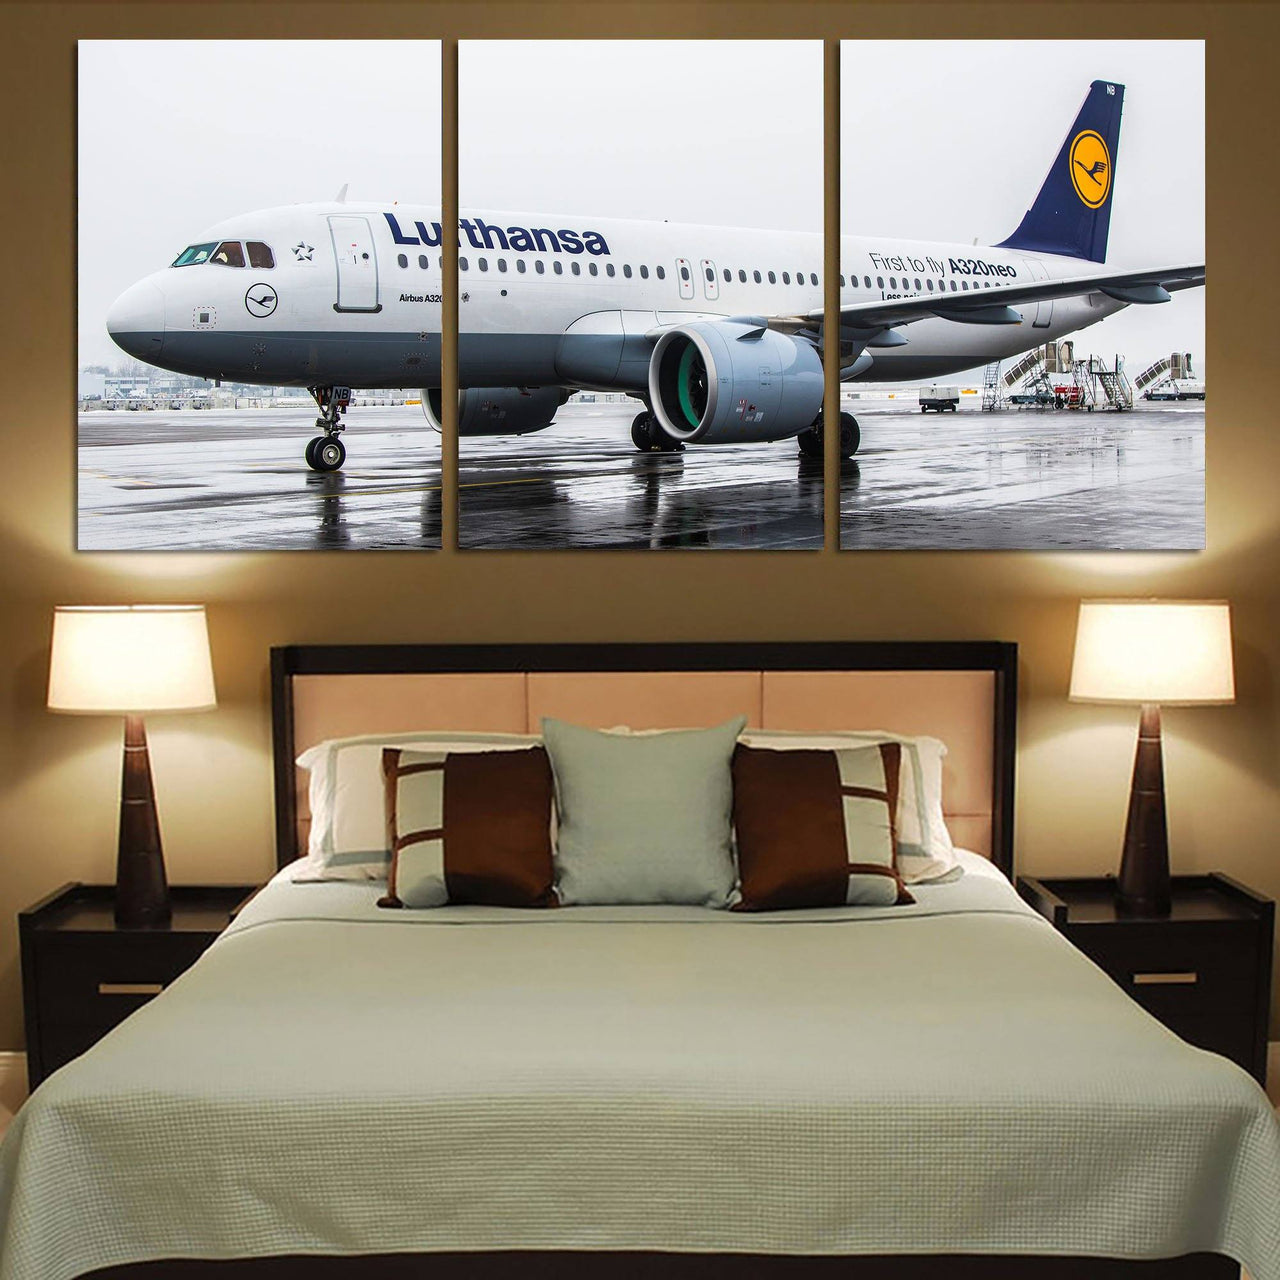 Lufthansa's A320 Neo Printed Canvas Posters (3 Pieces) Aviation Shop 